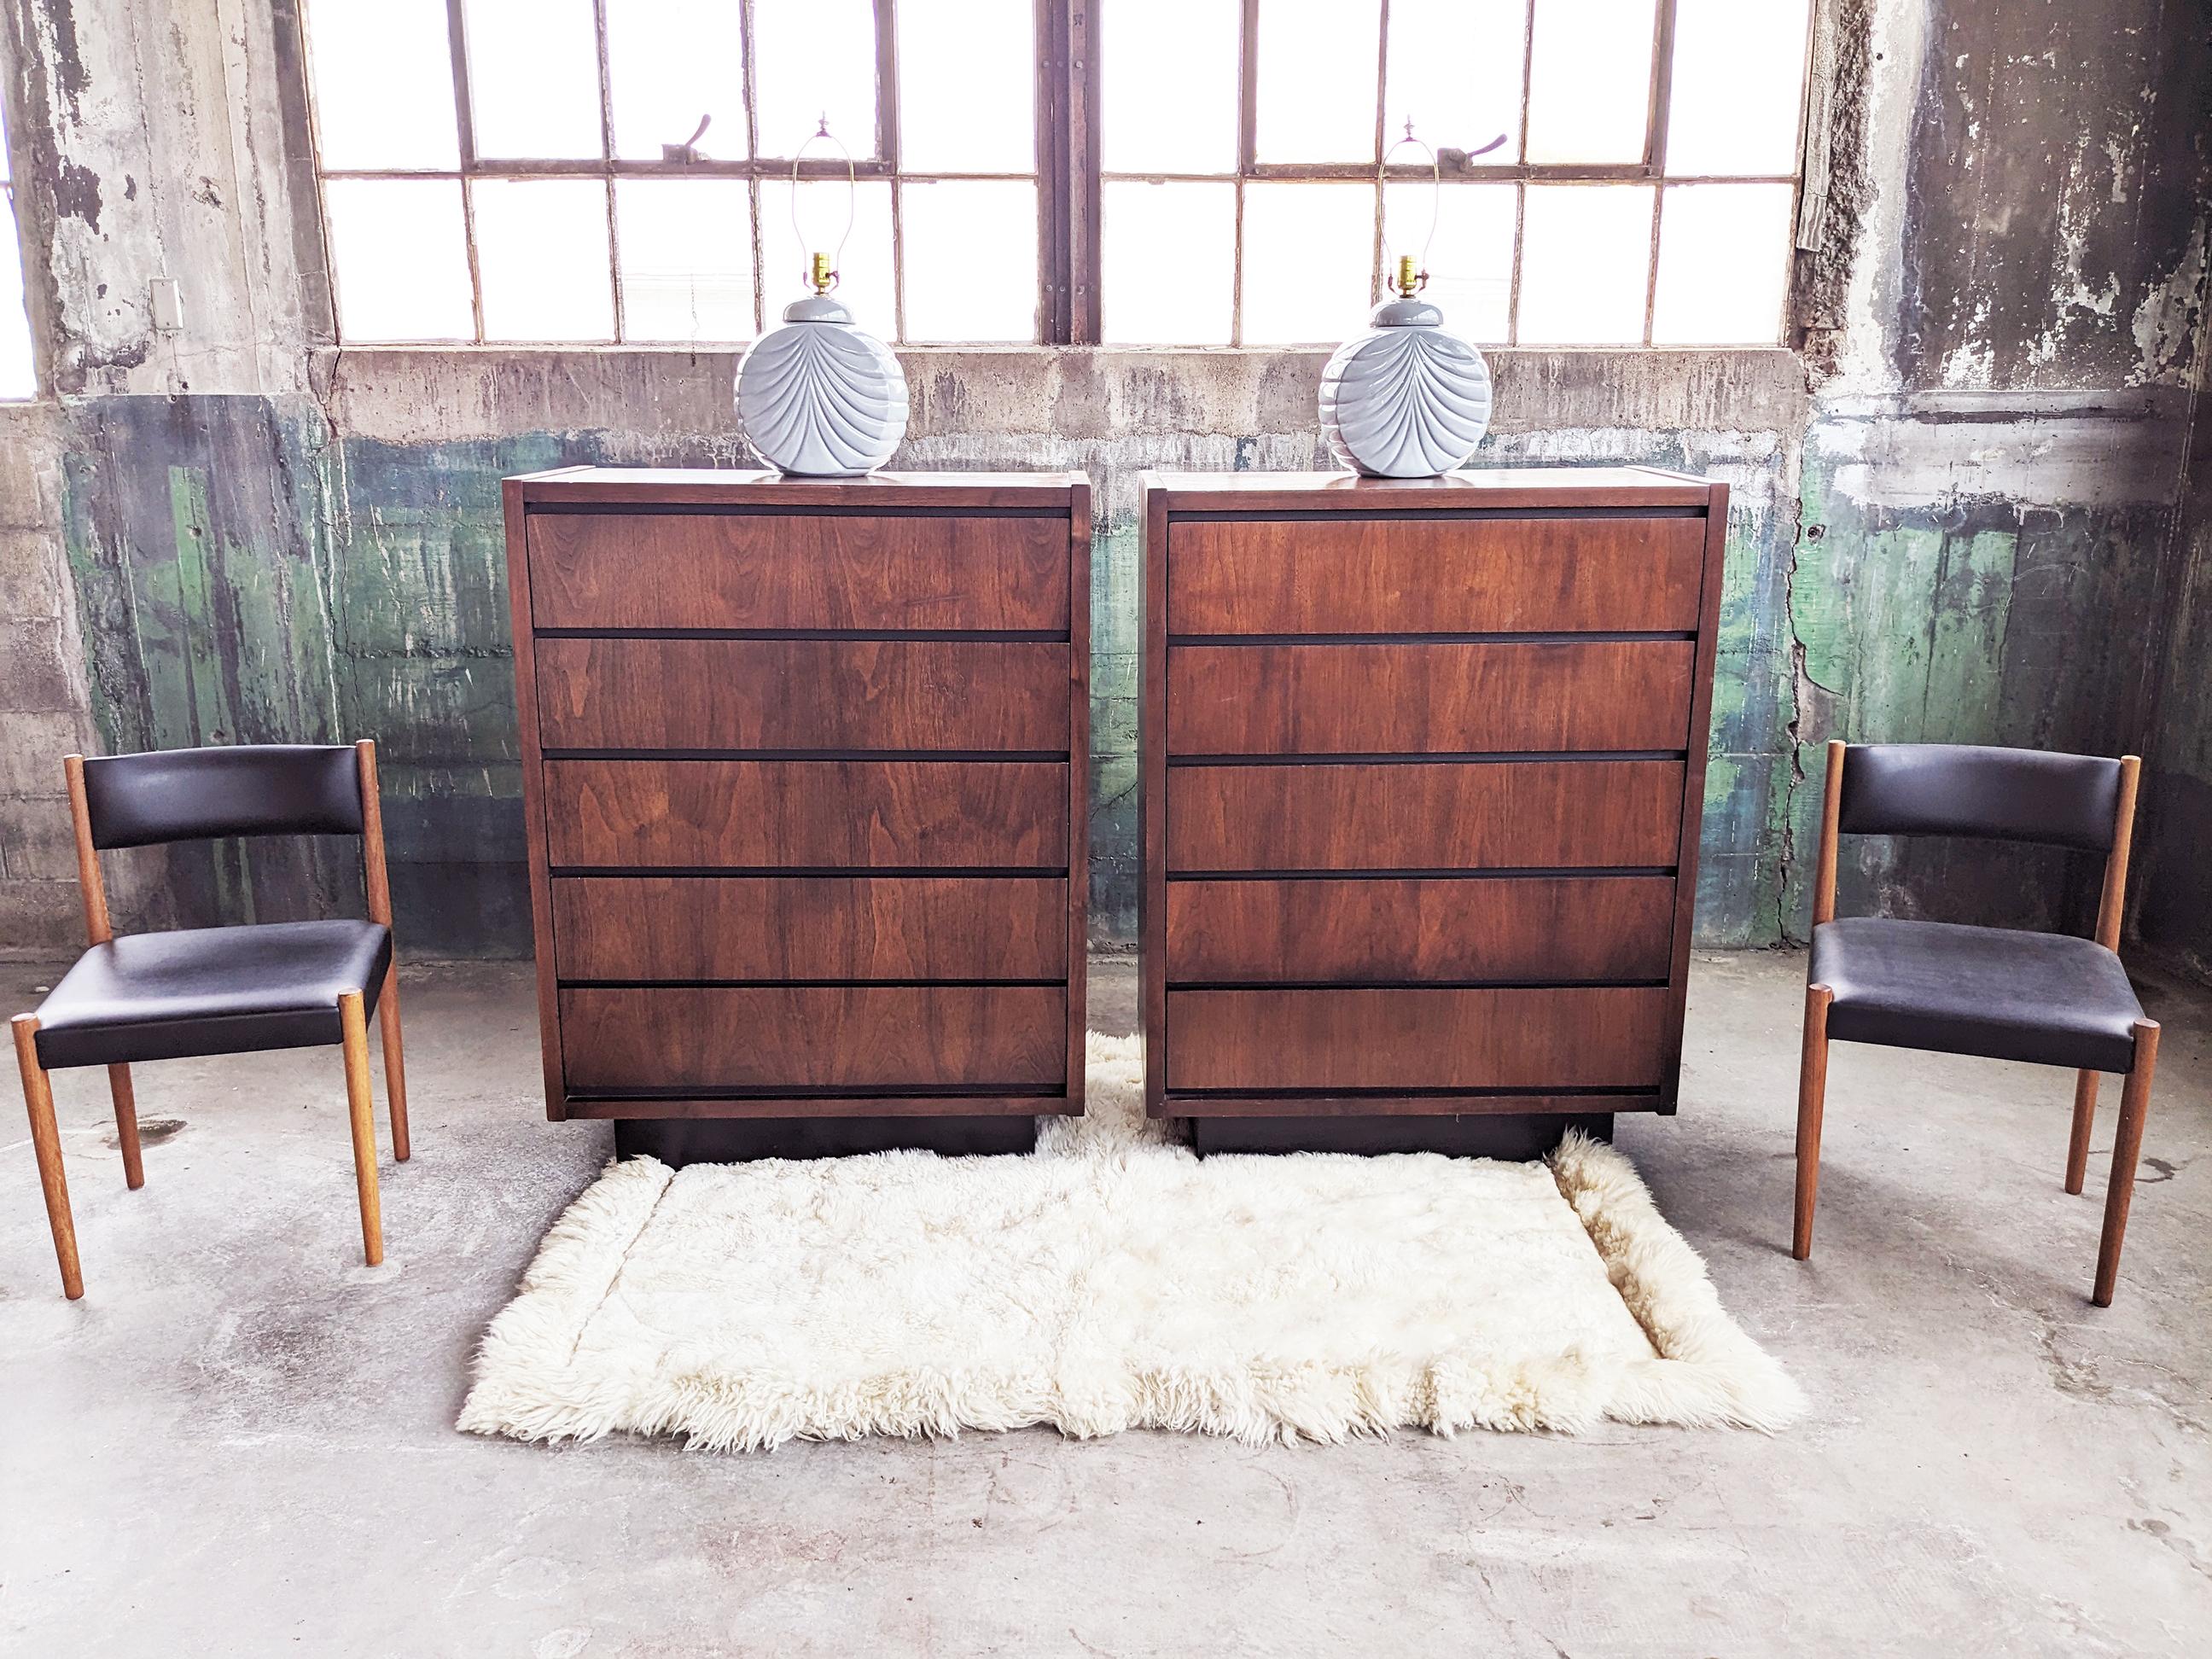 Incredible PAIR of two Mid Century, Brutalist, 1970s Dressers.  

Very nice looking and functional high quality Brutalist Lane dresser. The drawers catch on rollers, so they do not come out even when pulled hard. In very good condition